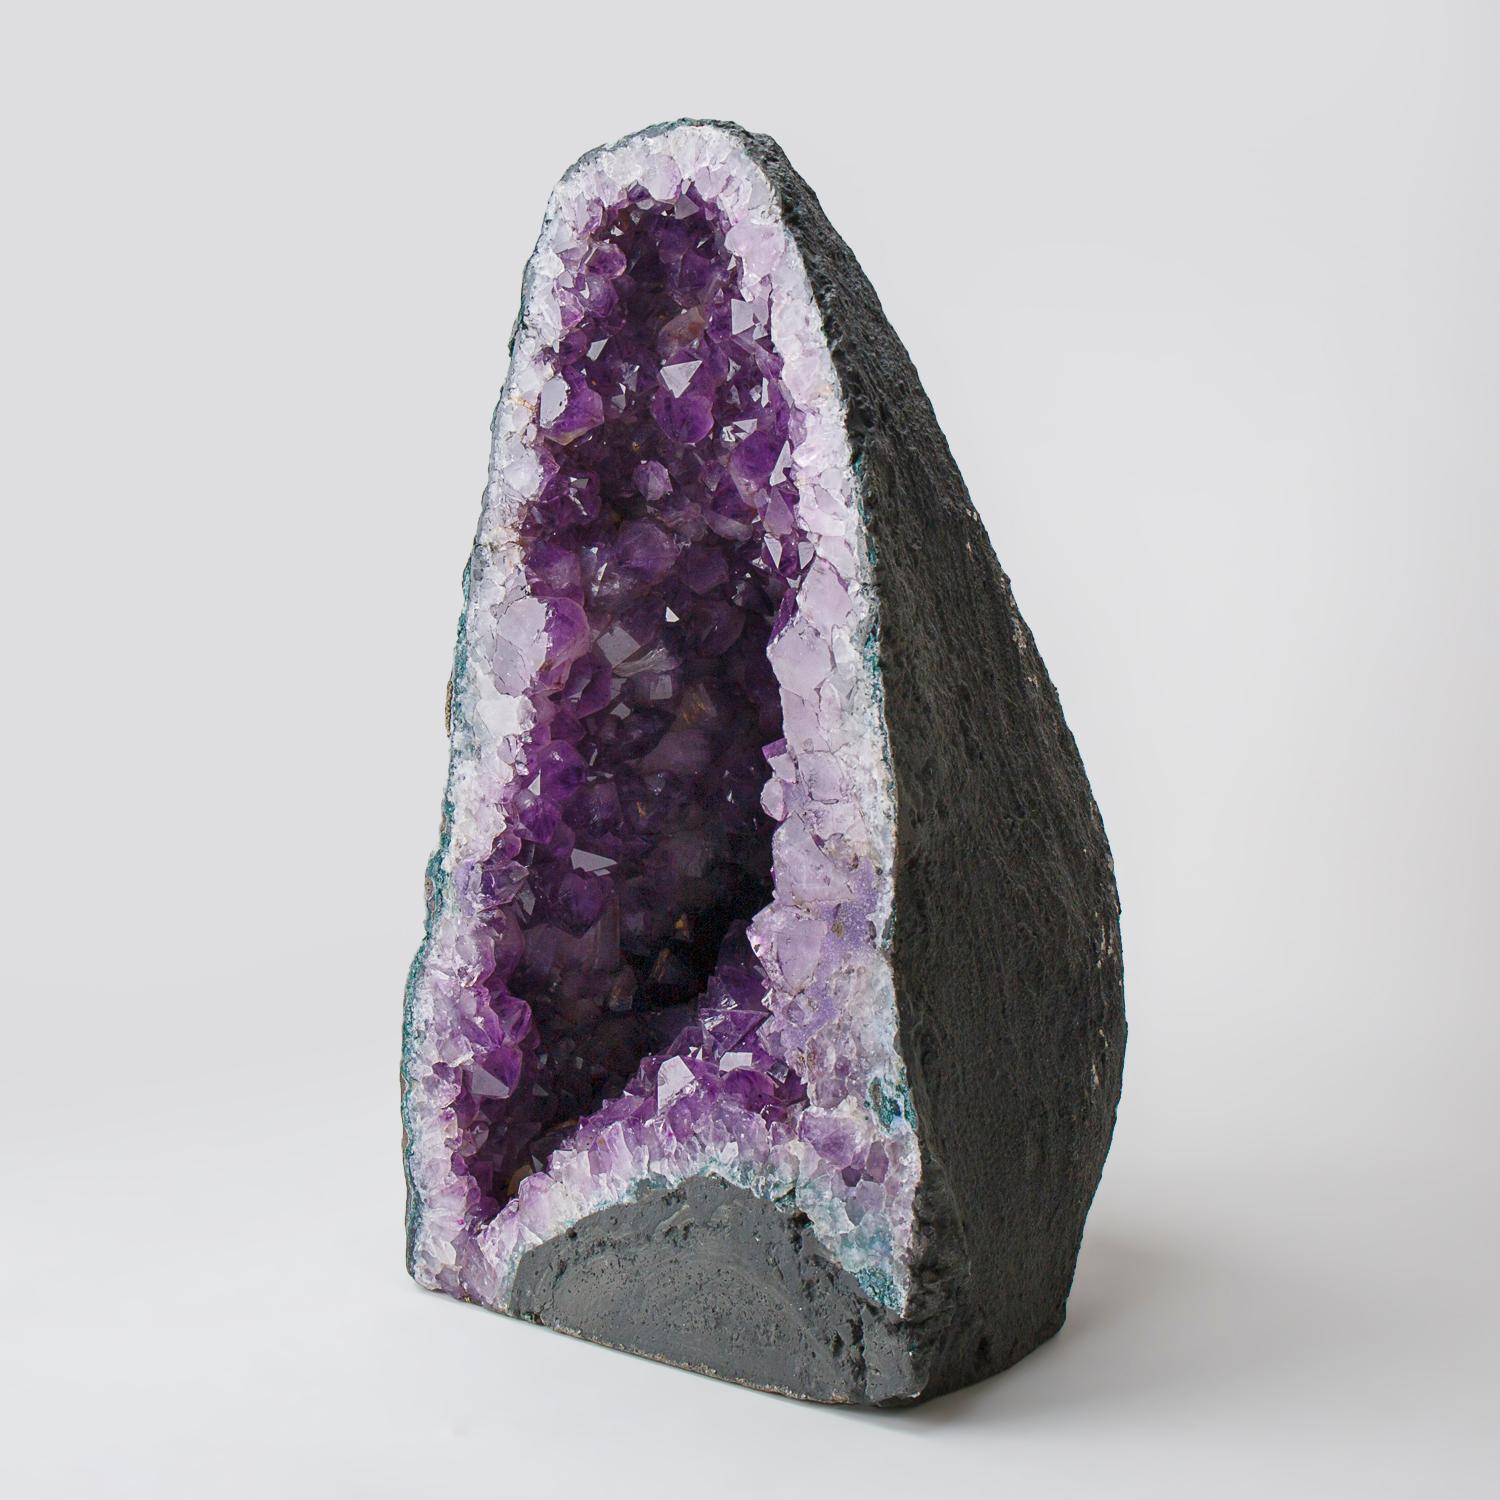 This Genuine Amethyst Cluster Geode from Brazil is a top quality natural formation of gem amethyst. The half geode cathedral decor features lustrous fully terminated crystals with highly reflective faces and a deep, transparent to translucent grape